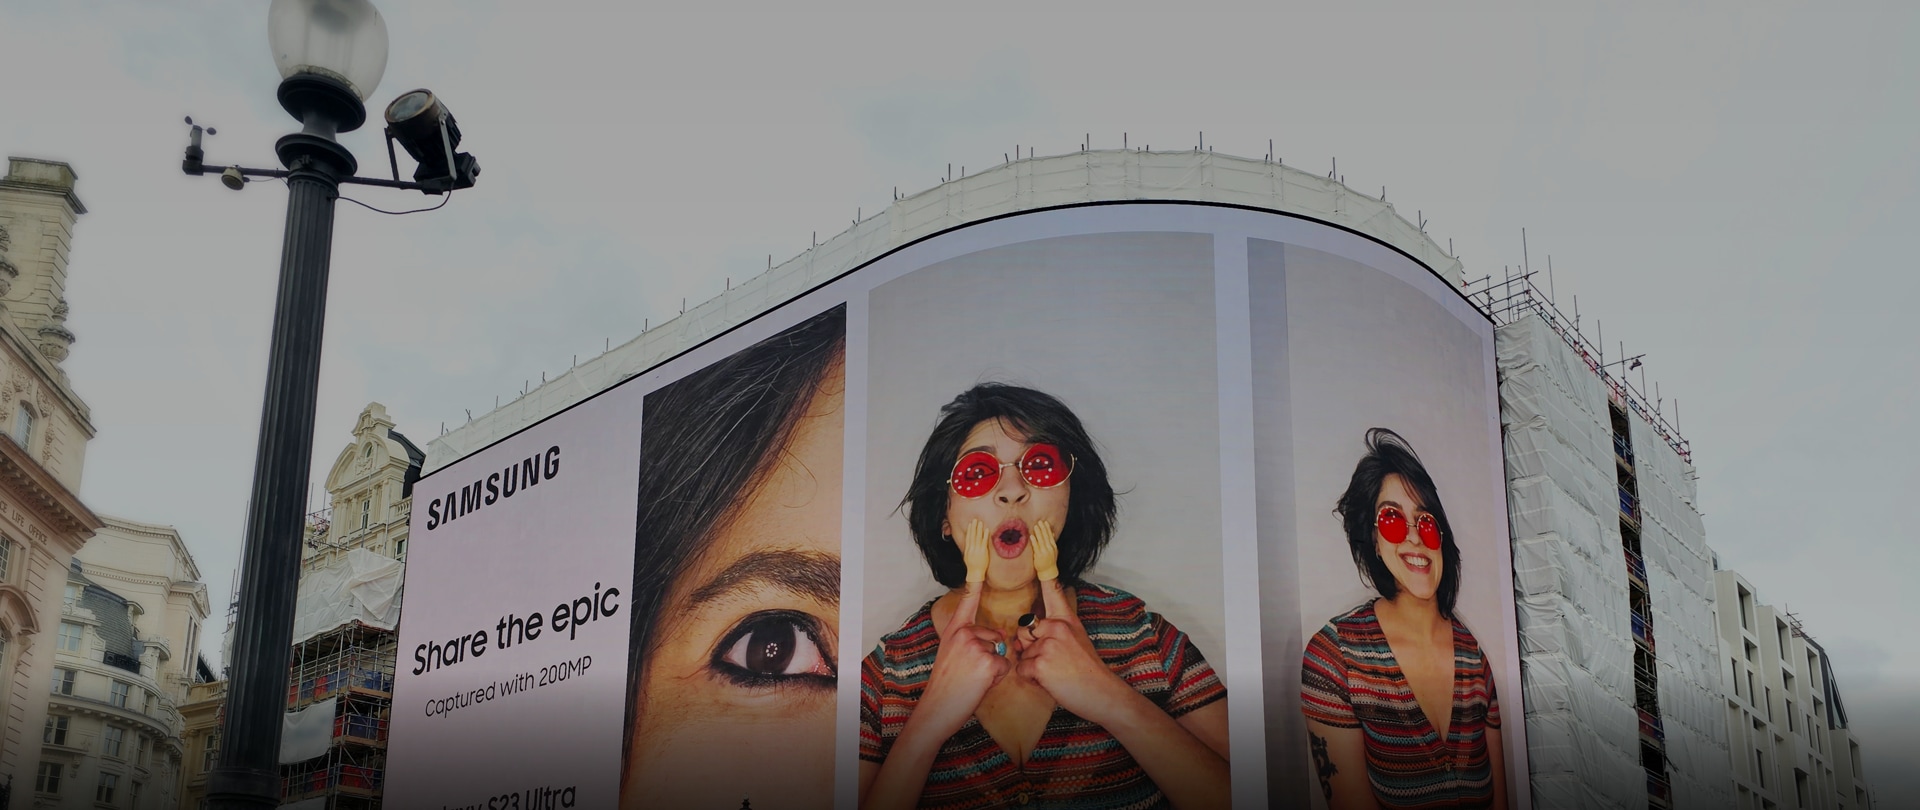 Samsung, More Pixels, Epic details, Inspired by ISOCELL, Two women on billboard